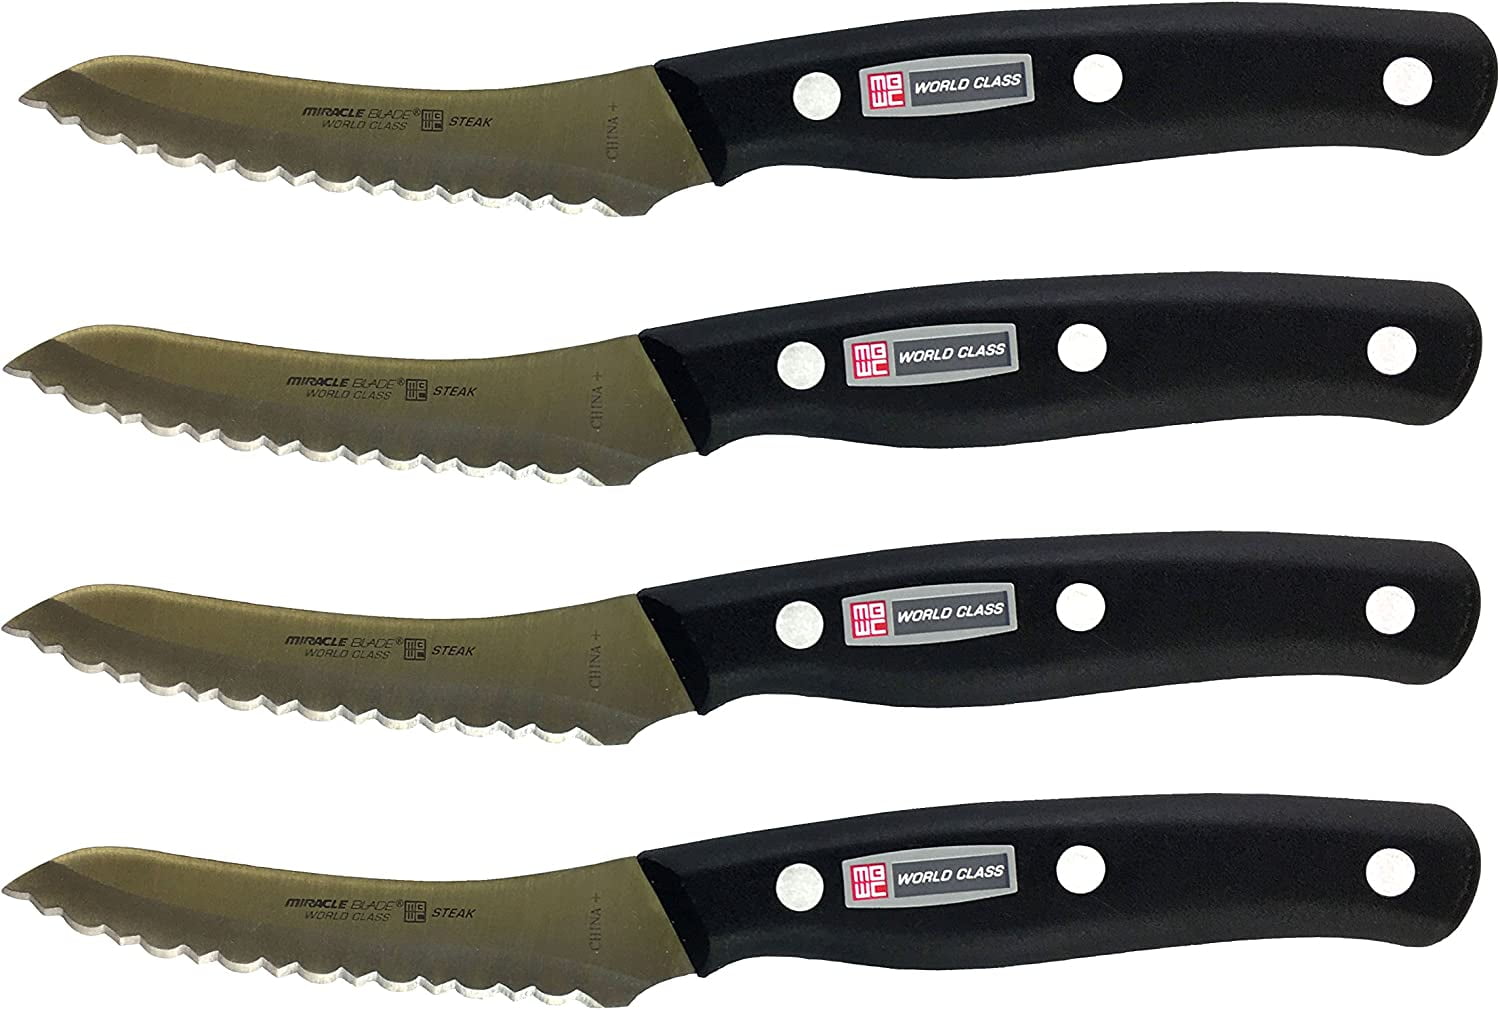 Miracle Blade World Class Knives